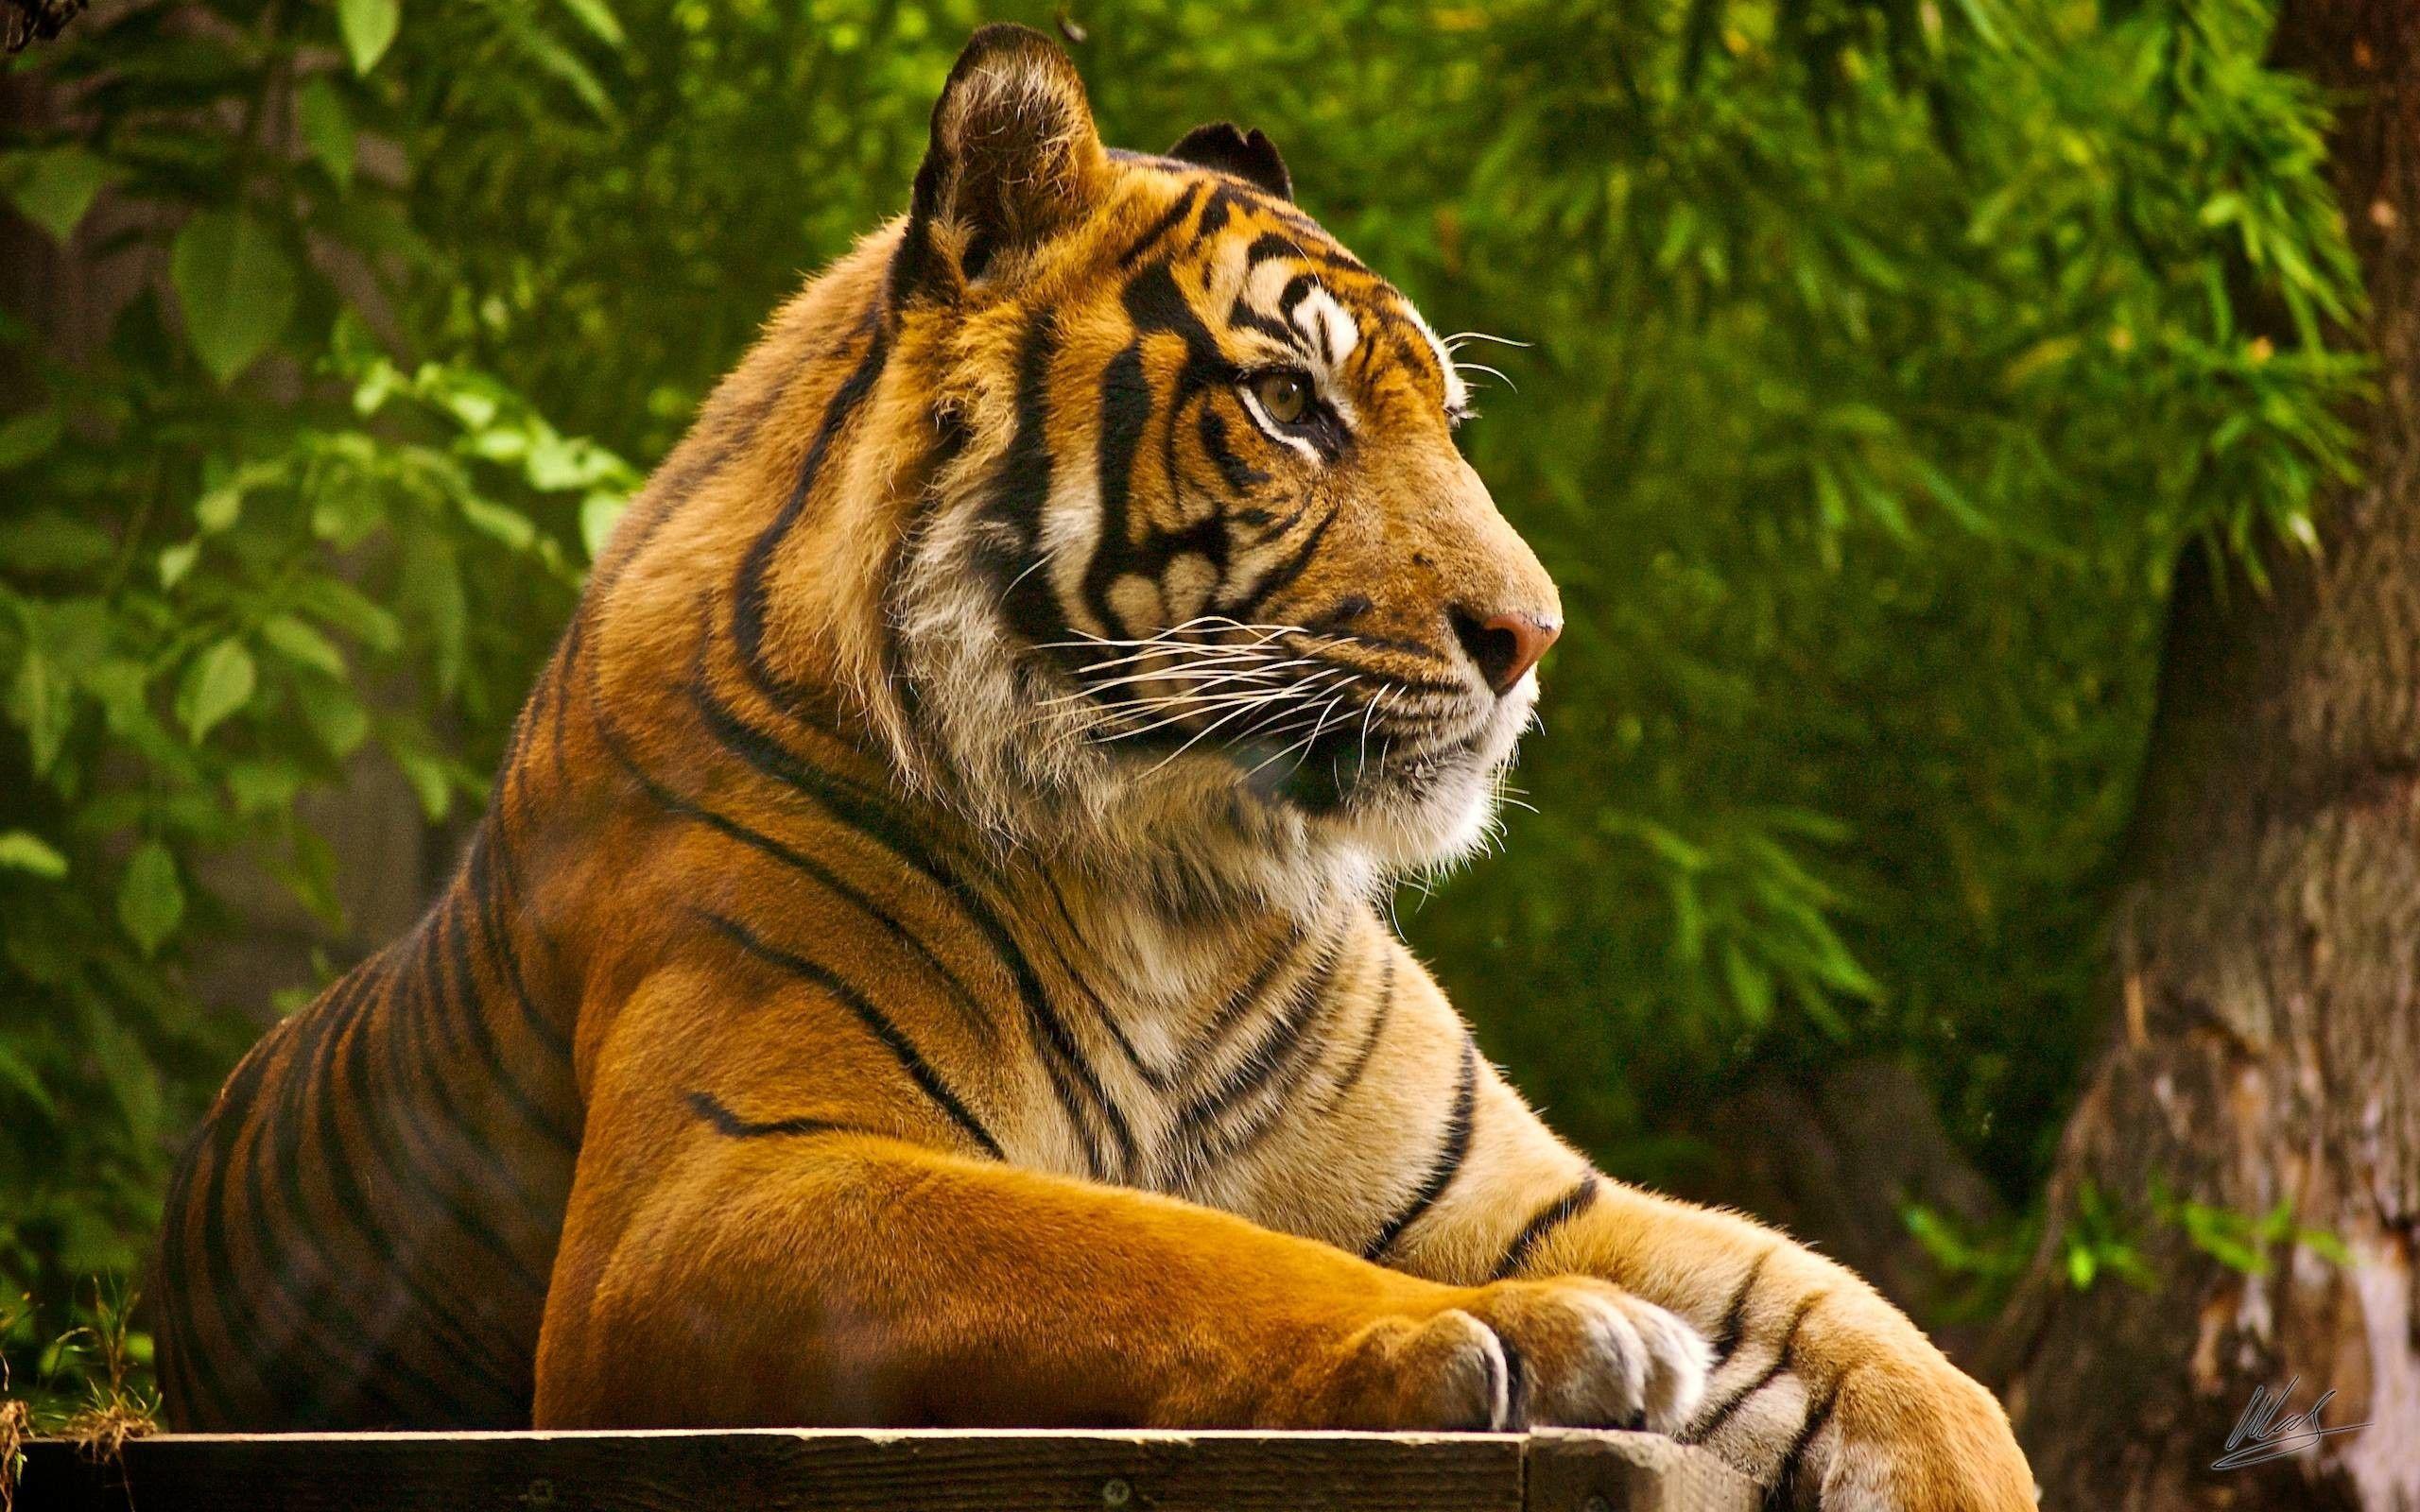 Wallpapers Of Tigers On Desktop Background Tiger Pictures Background Image  And Wallpaper for Free Download